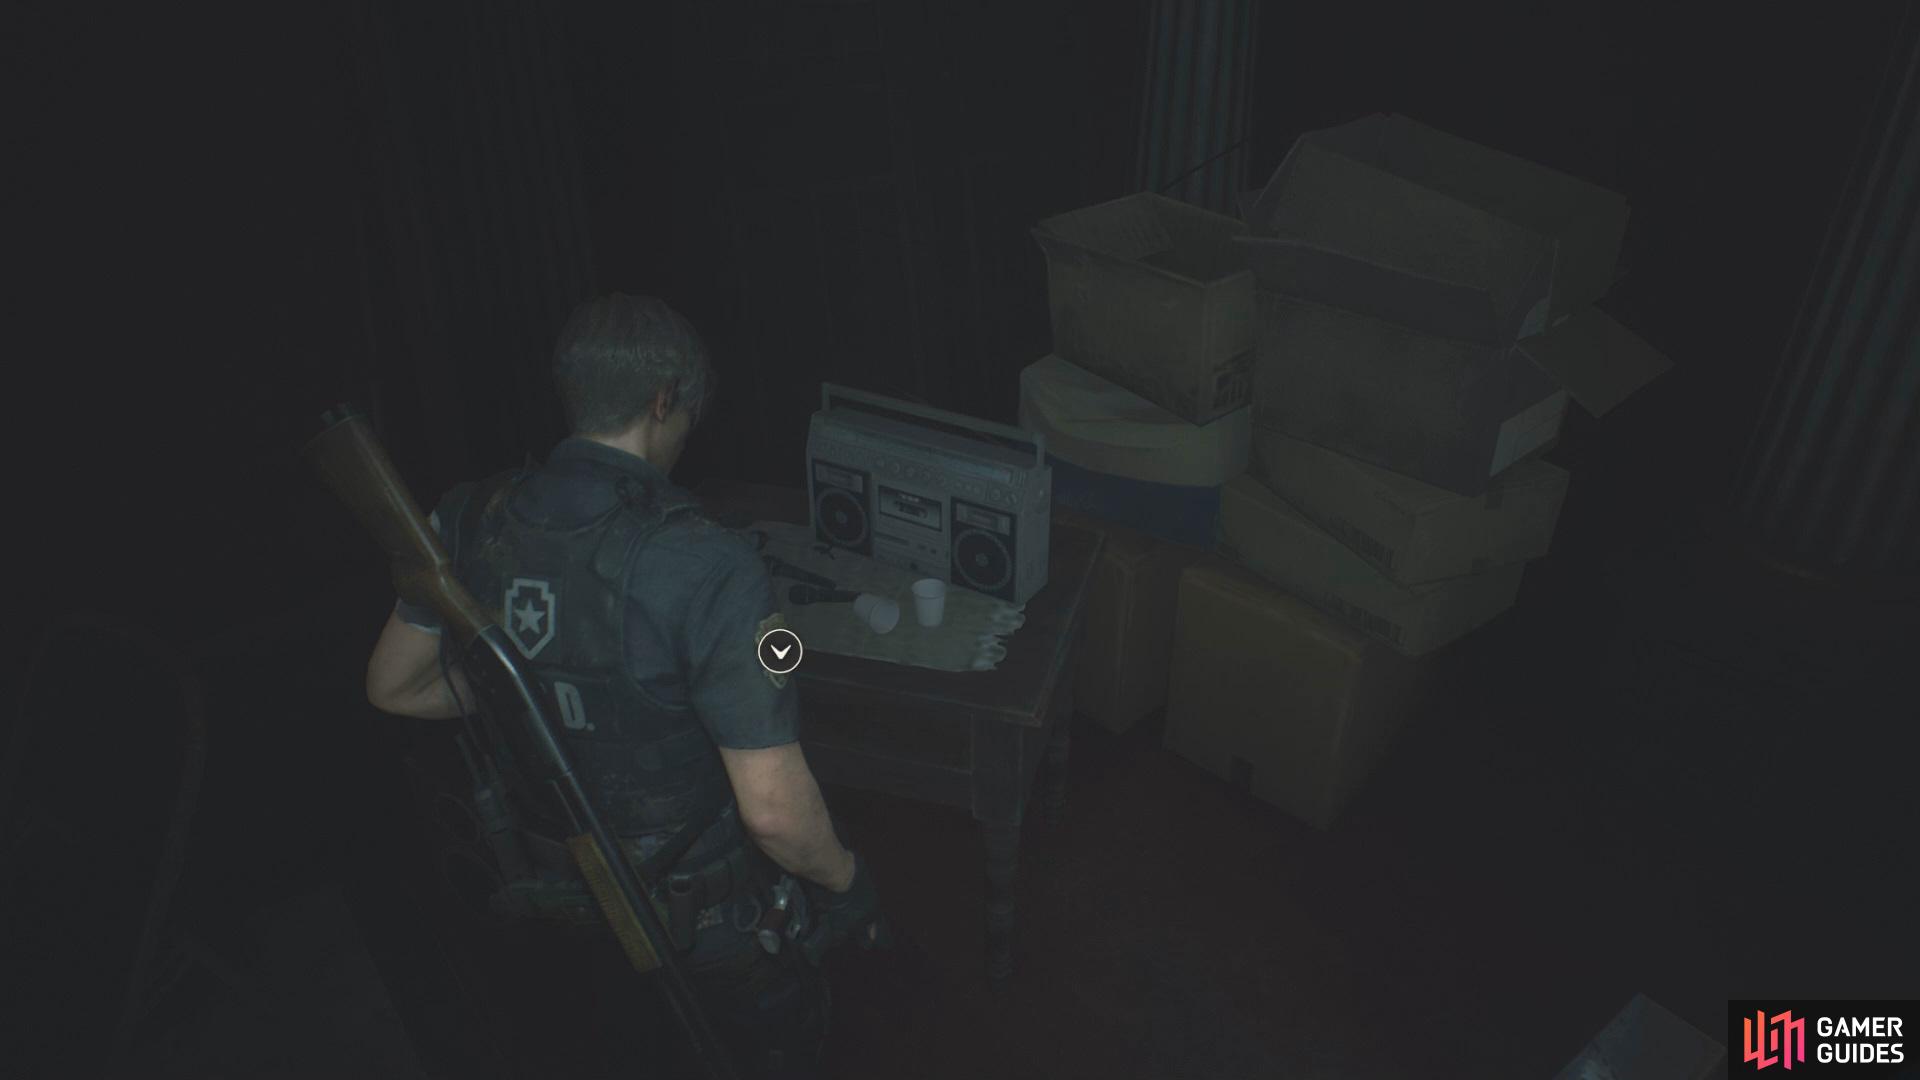 then head over to the northwest section to find another desk with a radio on top, inside will hold your second hidden treasure.